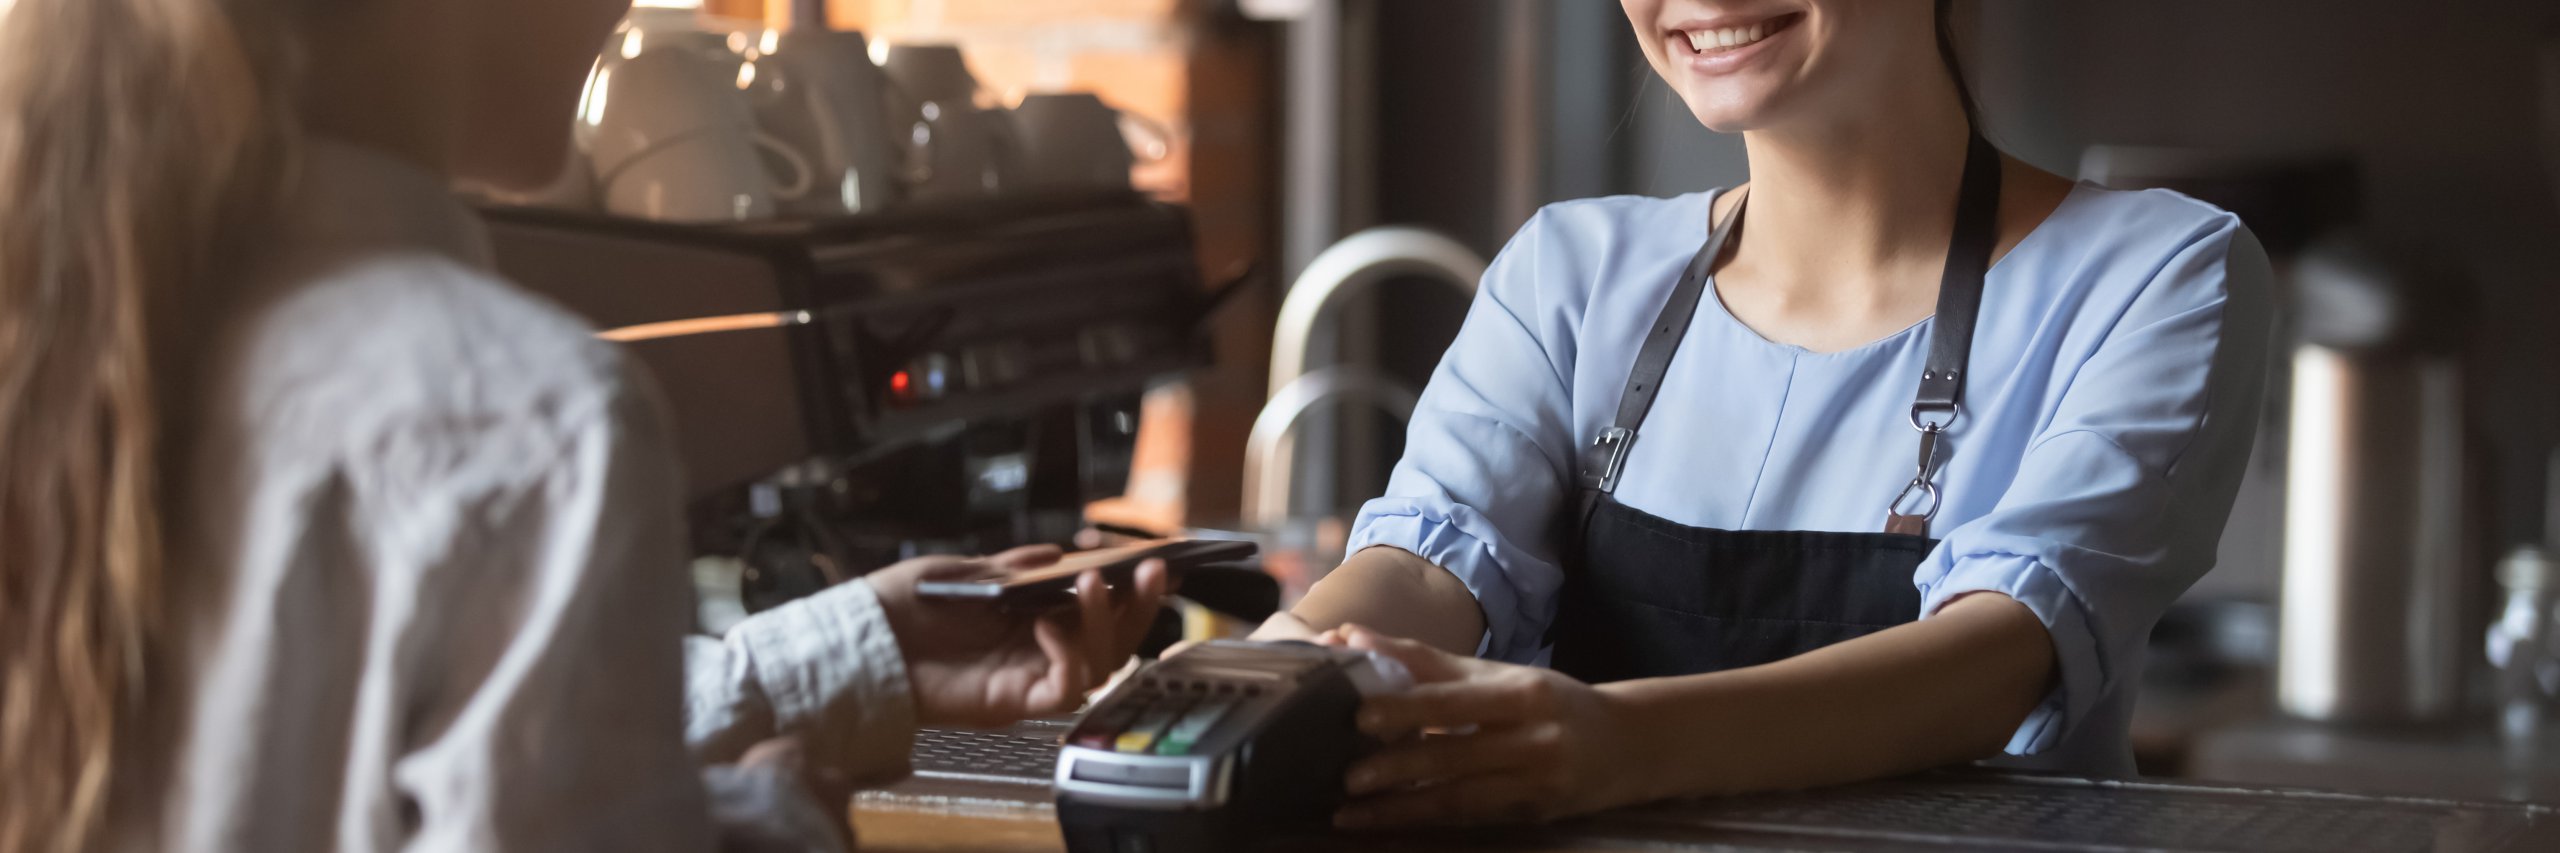 Customer in bar makes payment using smartphone application horizontal image